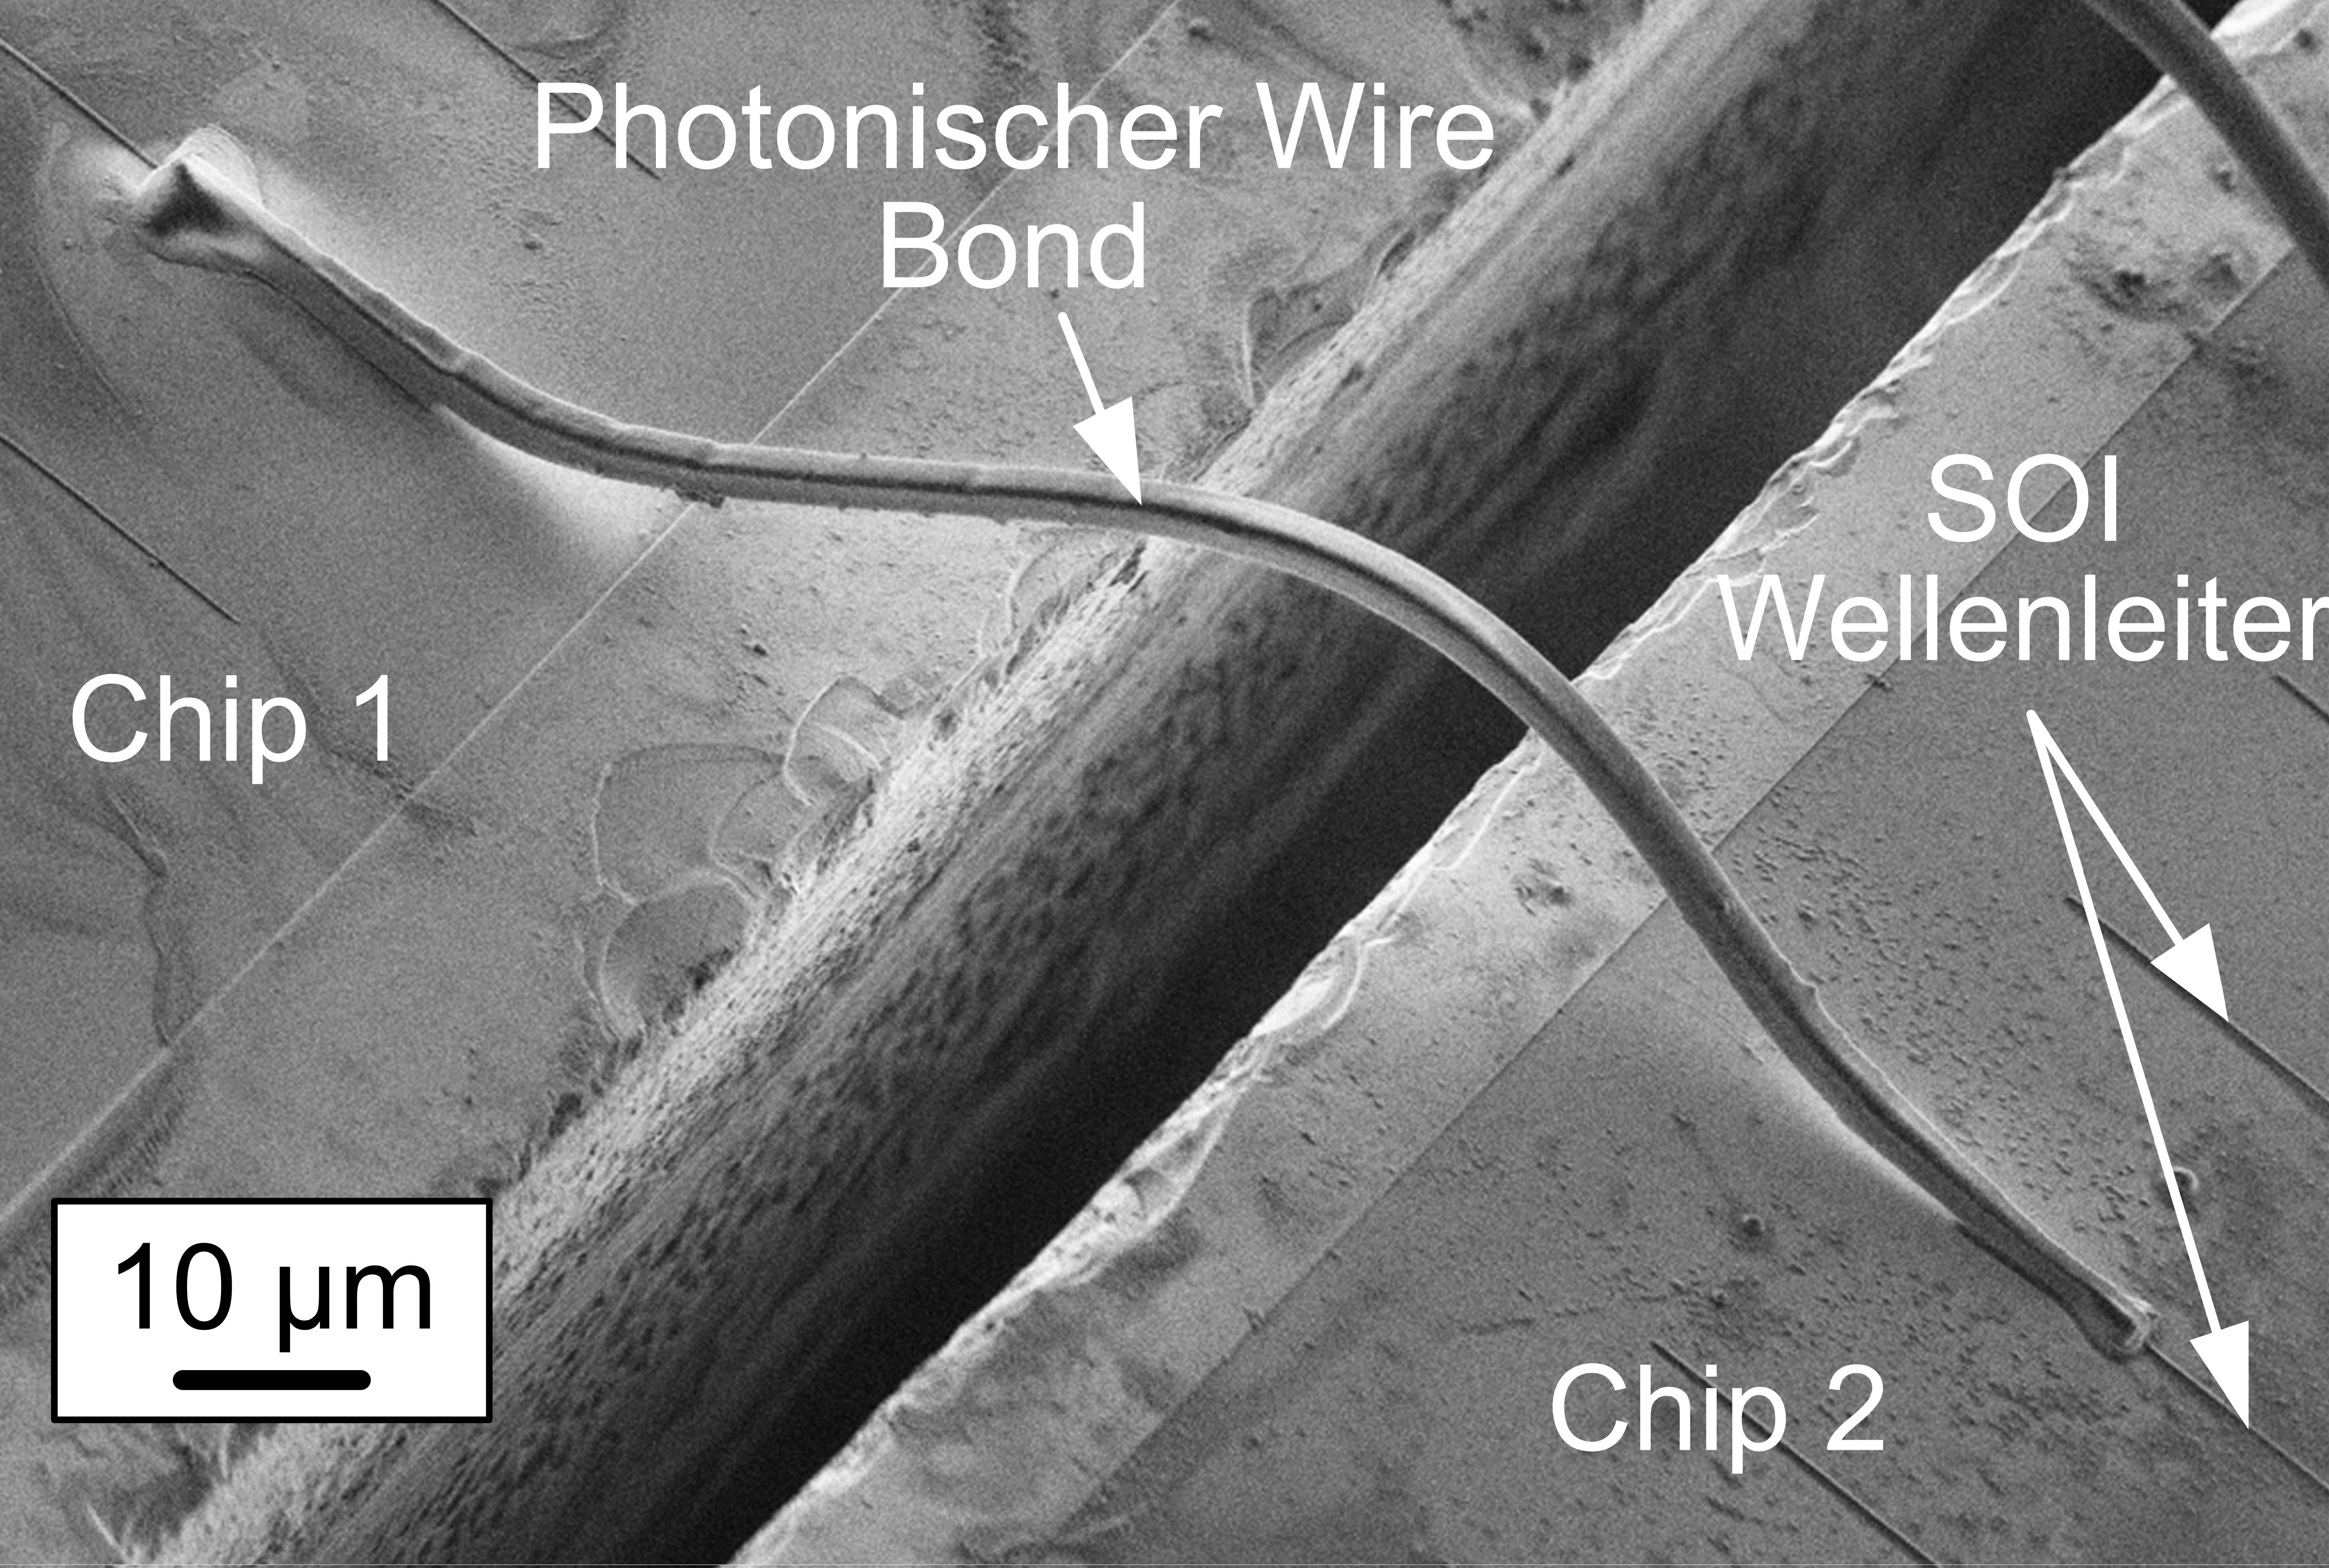 The wire bond is adapted to the position and orientation of the chips. 